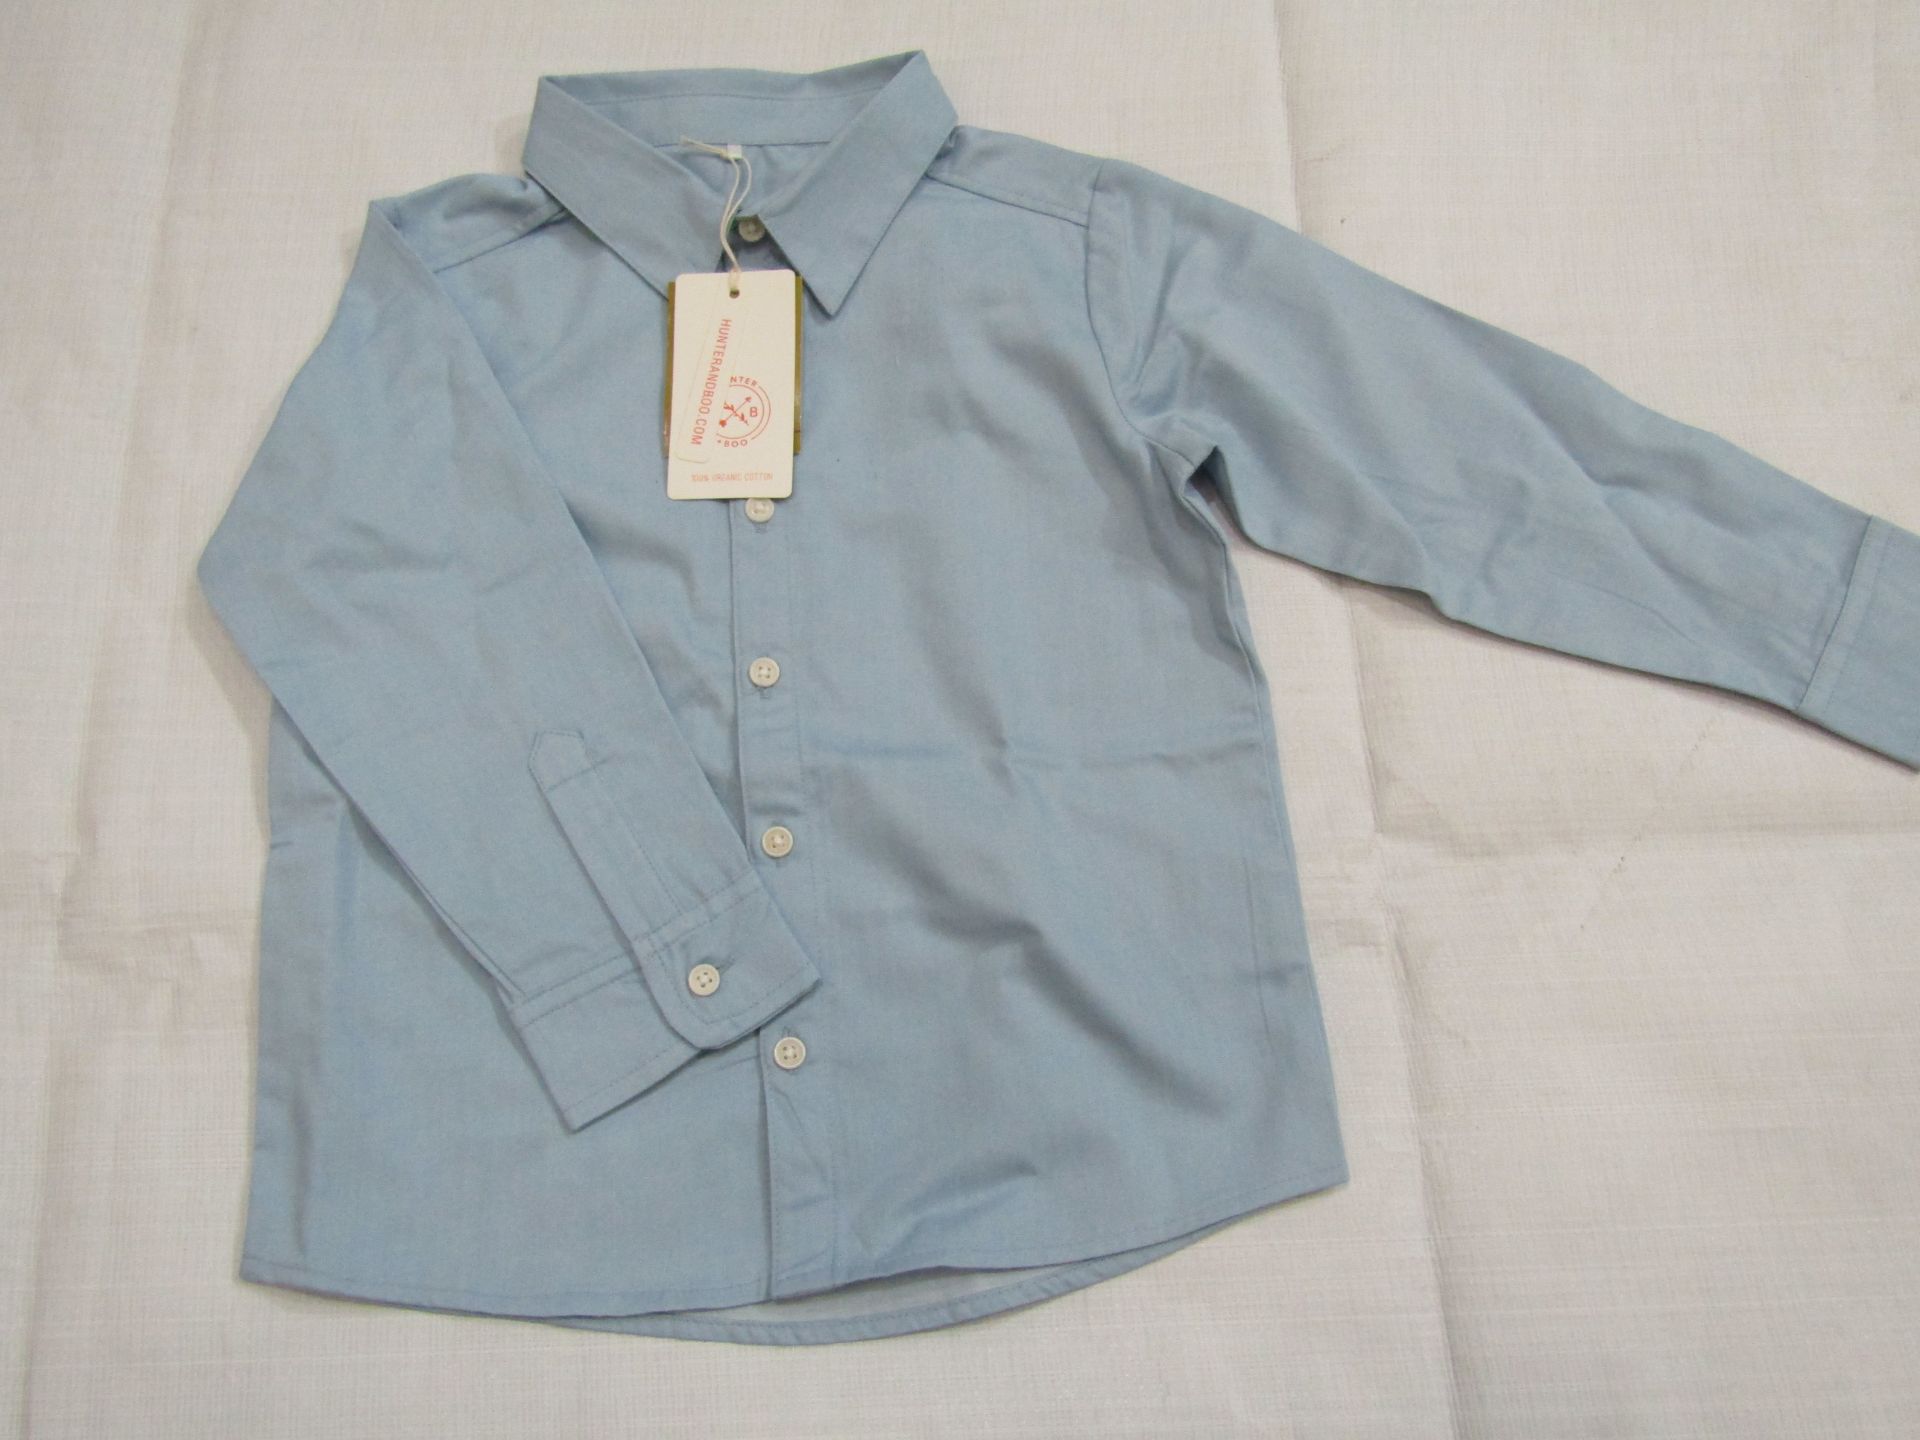 Hunter & Boo Chambray Shirt Blue Aged 3-4 yrs New & Packaged RRP £21